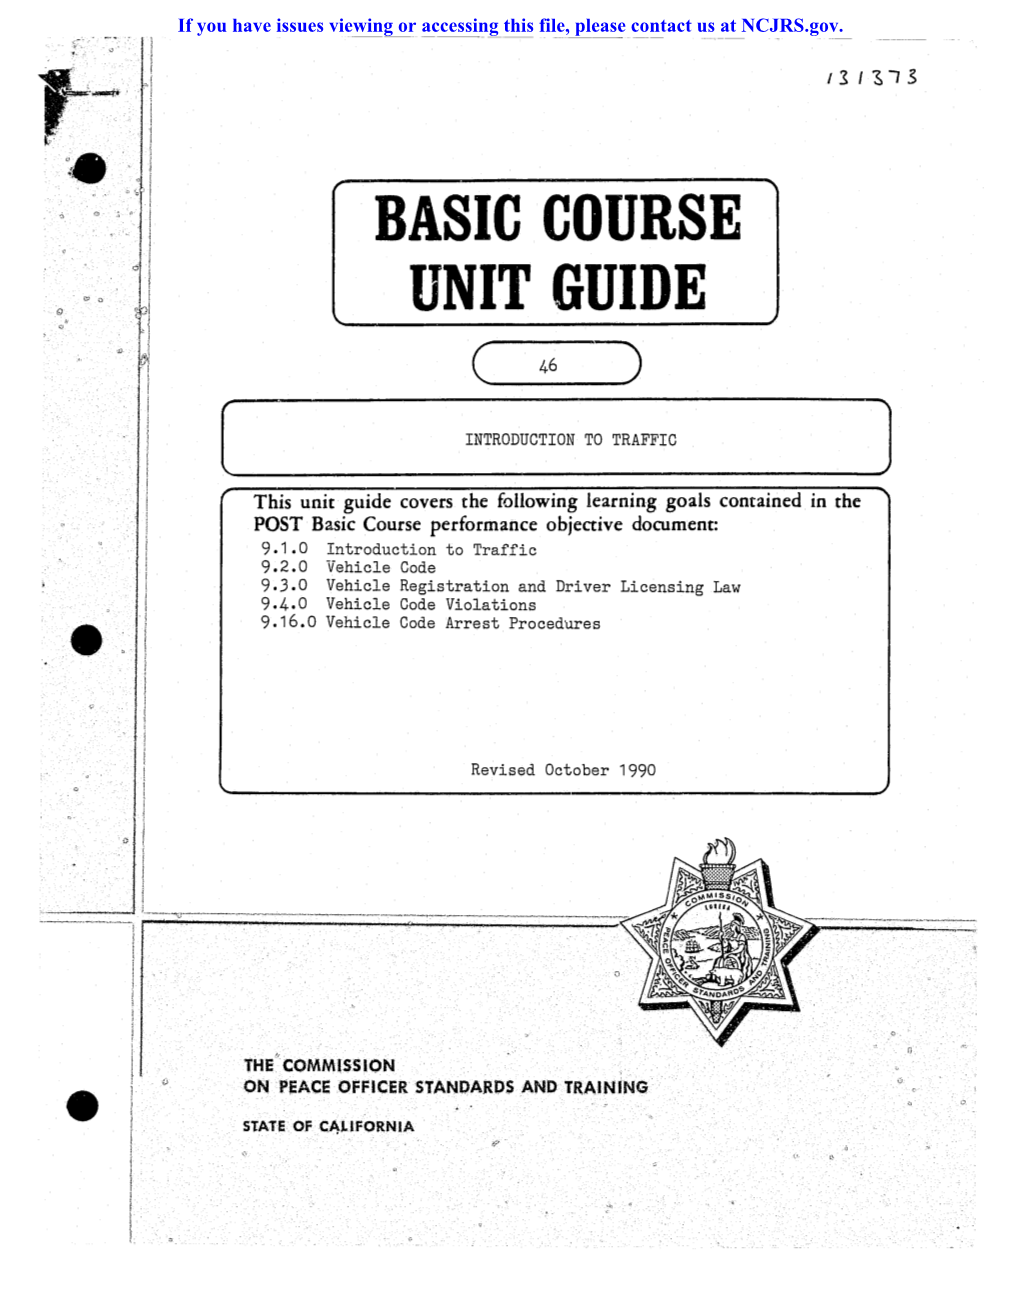 This Unit of Instruction Is Designed As a Guideline for Performance Objective-Based Law Enforcement Basic Training